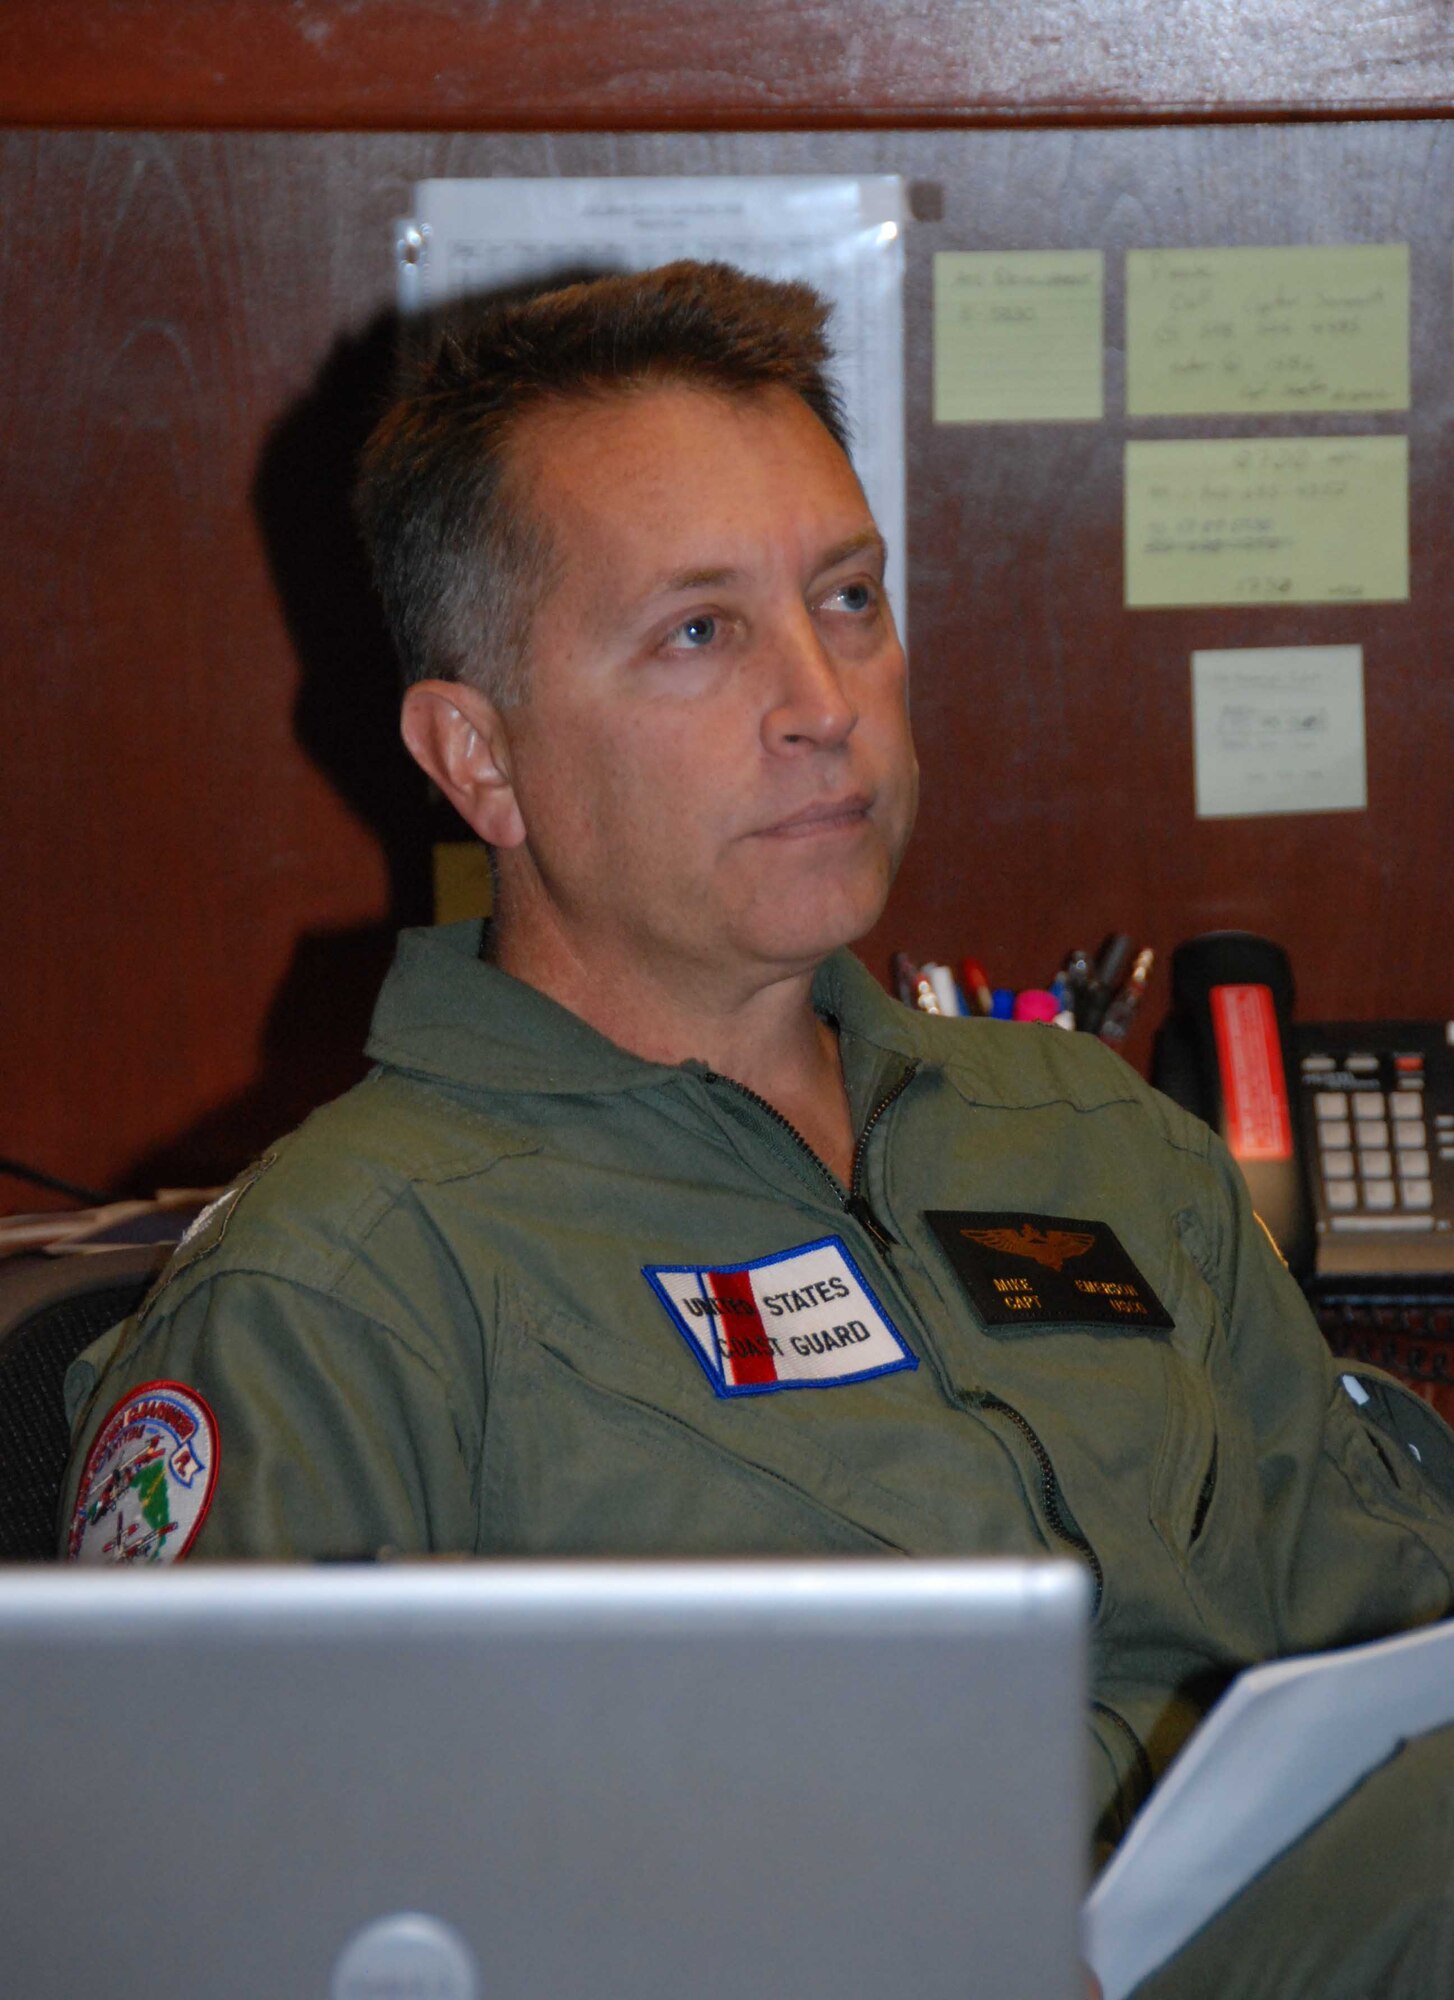 Working out of the 601st Air & Space Operations Center at Tyndall AFB, Fla., U.S. Coast Guard Capt. Mike Emerson, Aviation Coordination Command director, leads a team of professionals providing air operations scheduling and deconfliction management to the affected area over the Deepwater Horizon oil spill in the Gulf of Mexico.